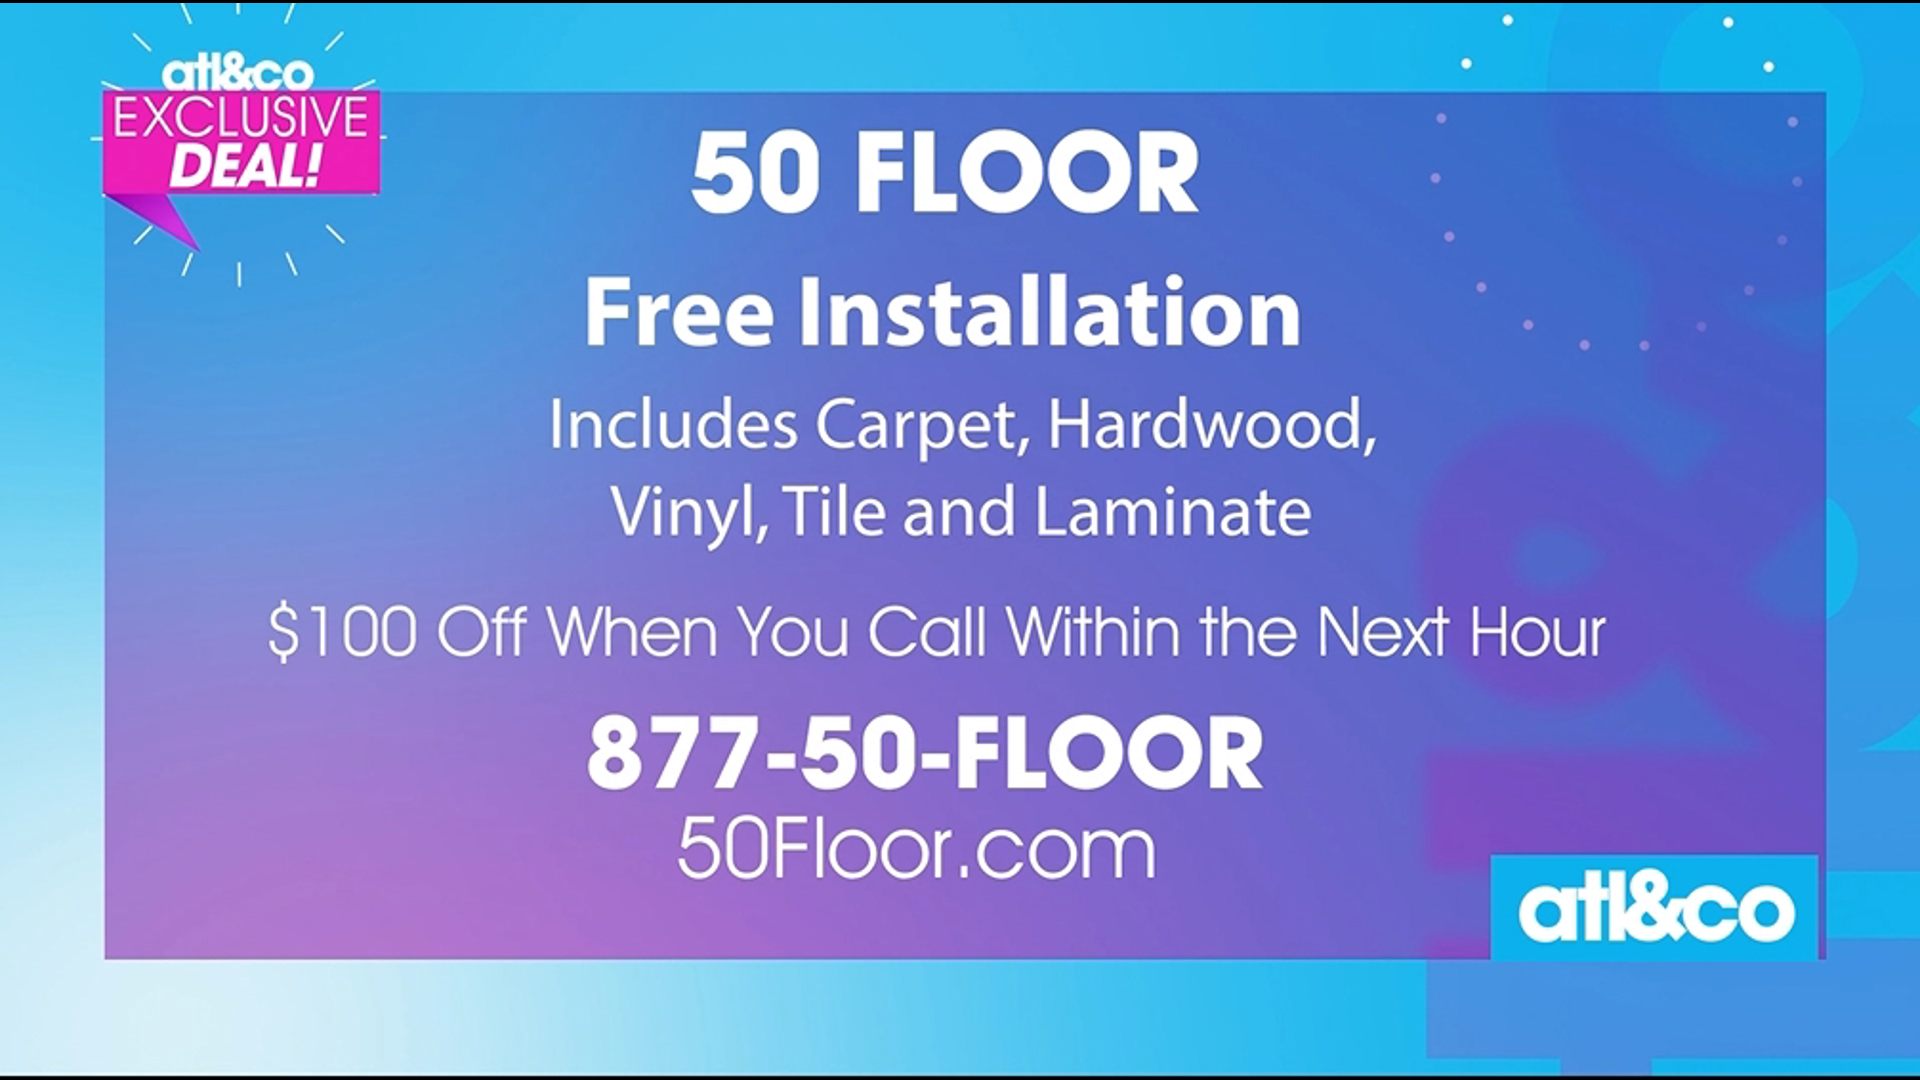 Get free installation and $100 off your entire order from 50 Floor.